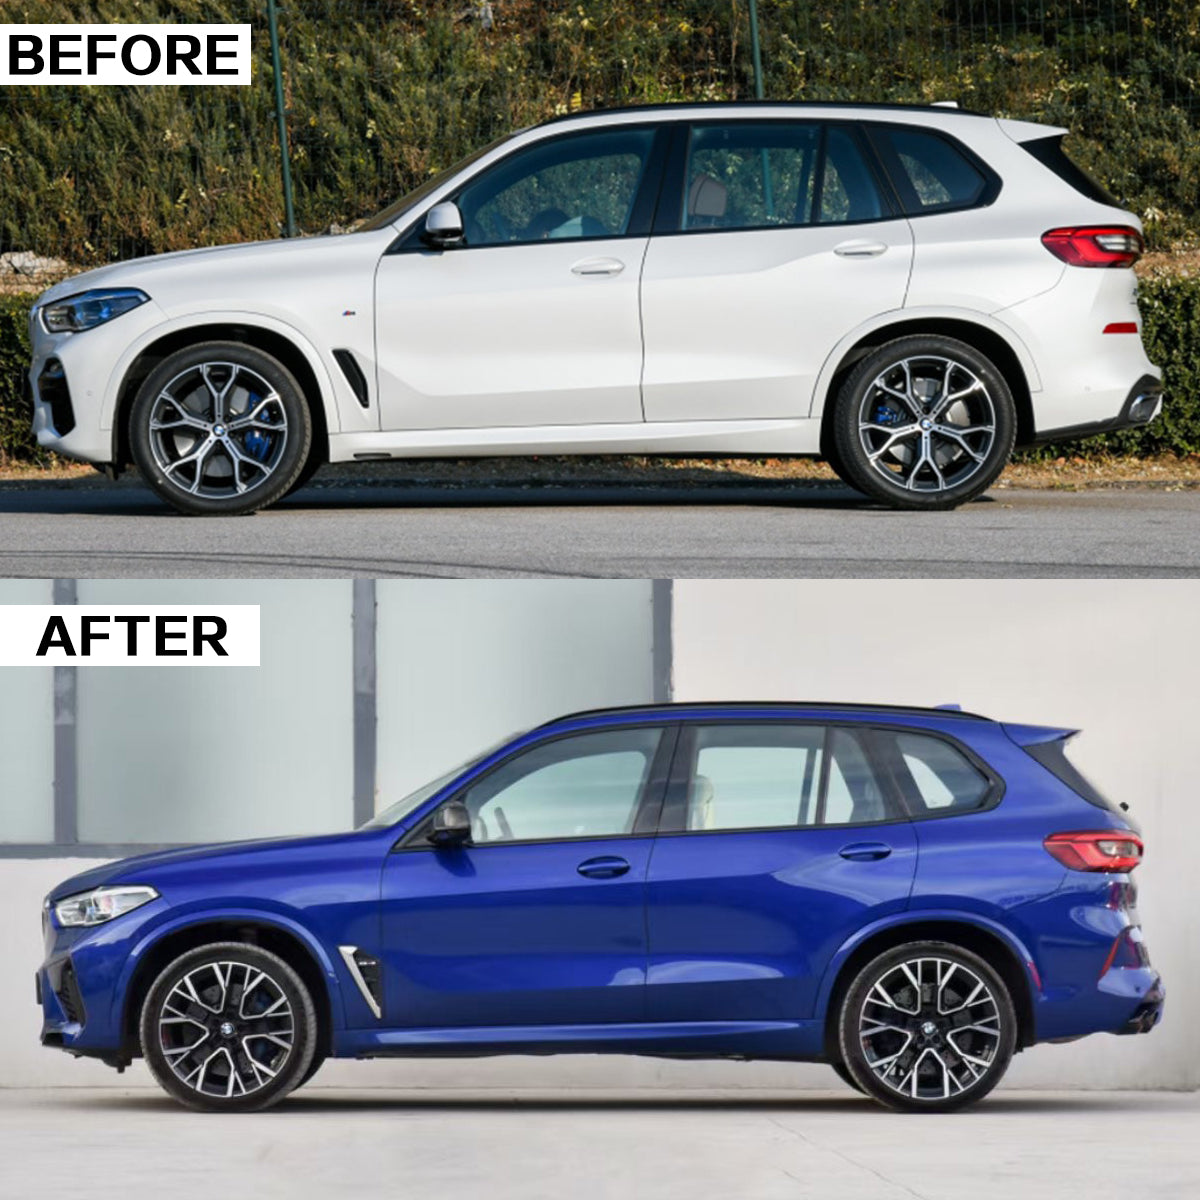 THE 1:1 BMW BODY KIT FOR G05 X5 UPGRADE TO F95 X5M